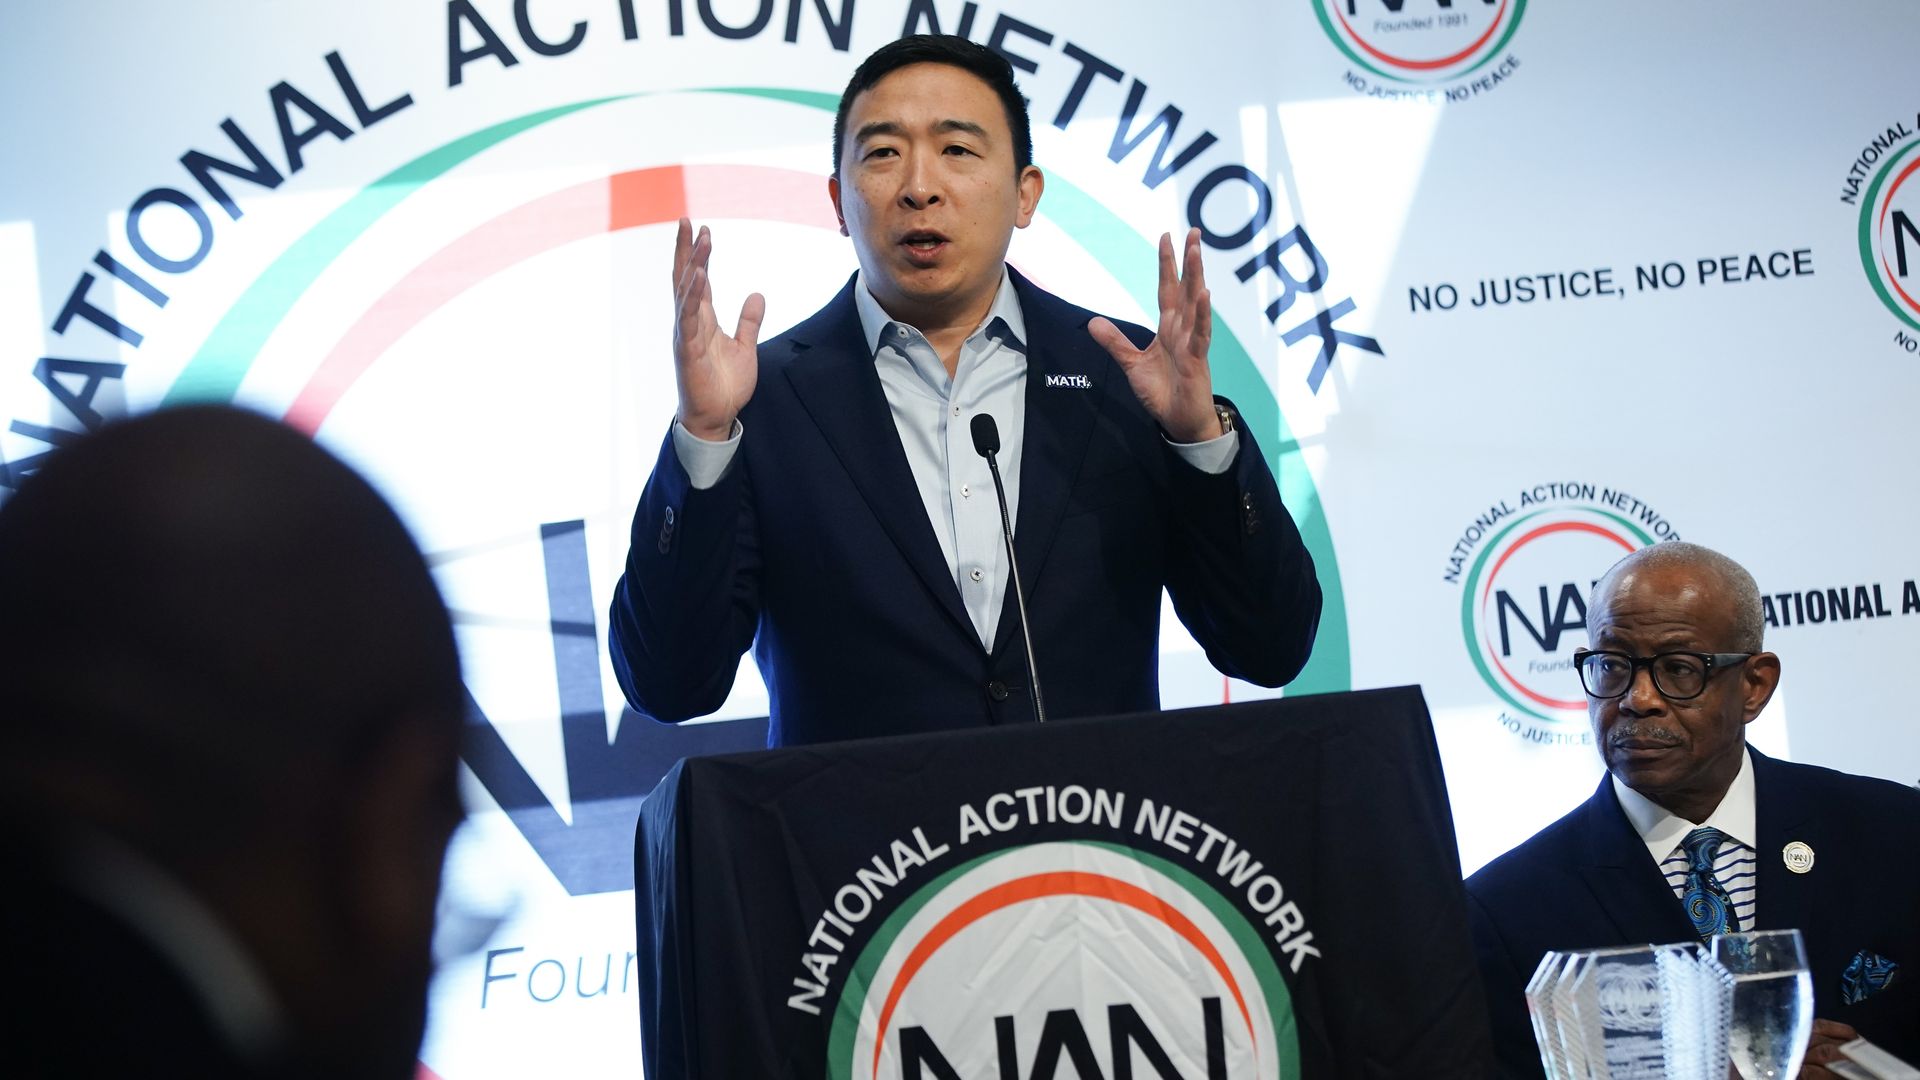  Democratic presidential candidate Andrew Yang speaks at the National Action Networks Southeast Regional Conference on November 21, 2019 in Atlanta, Georgia.